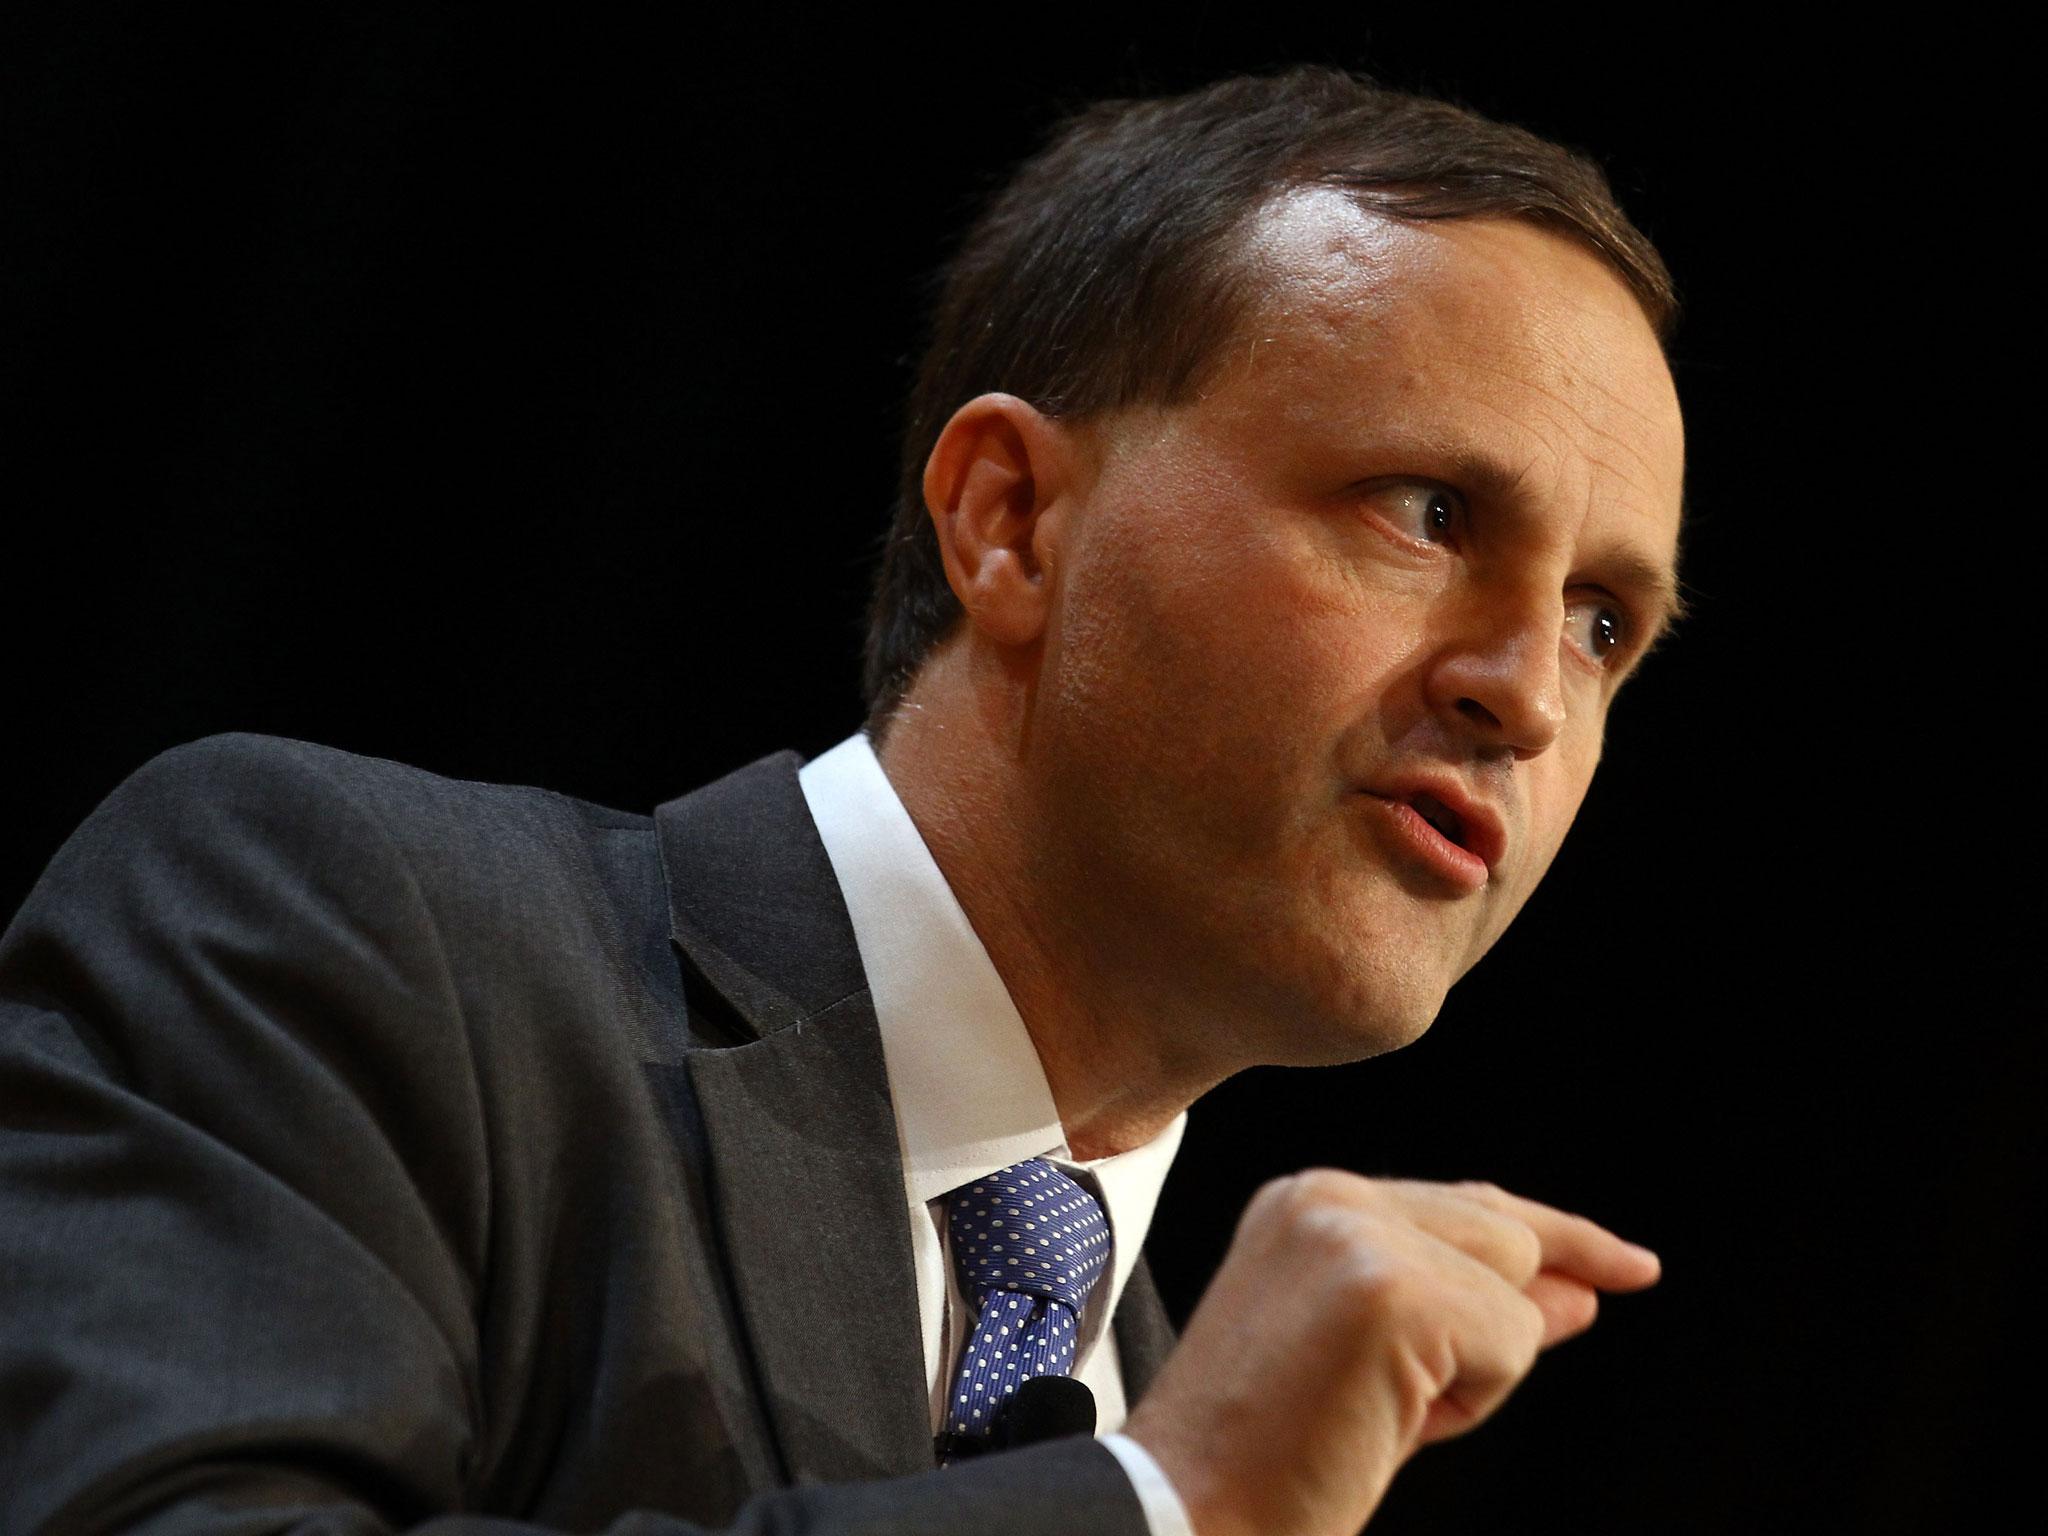 Steve Webb, the Pensions minister, said that the pensioners of tomorrow could not afford to rely on the state pension